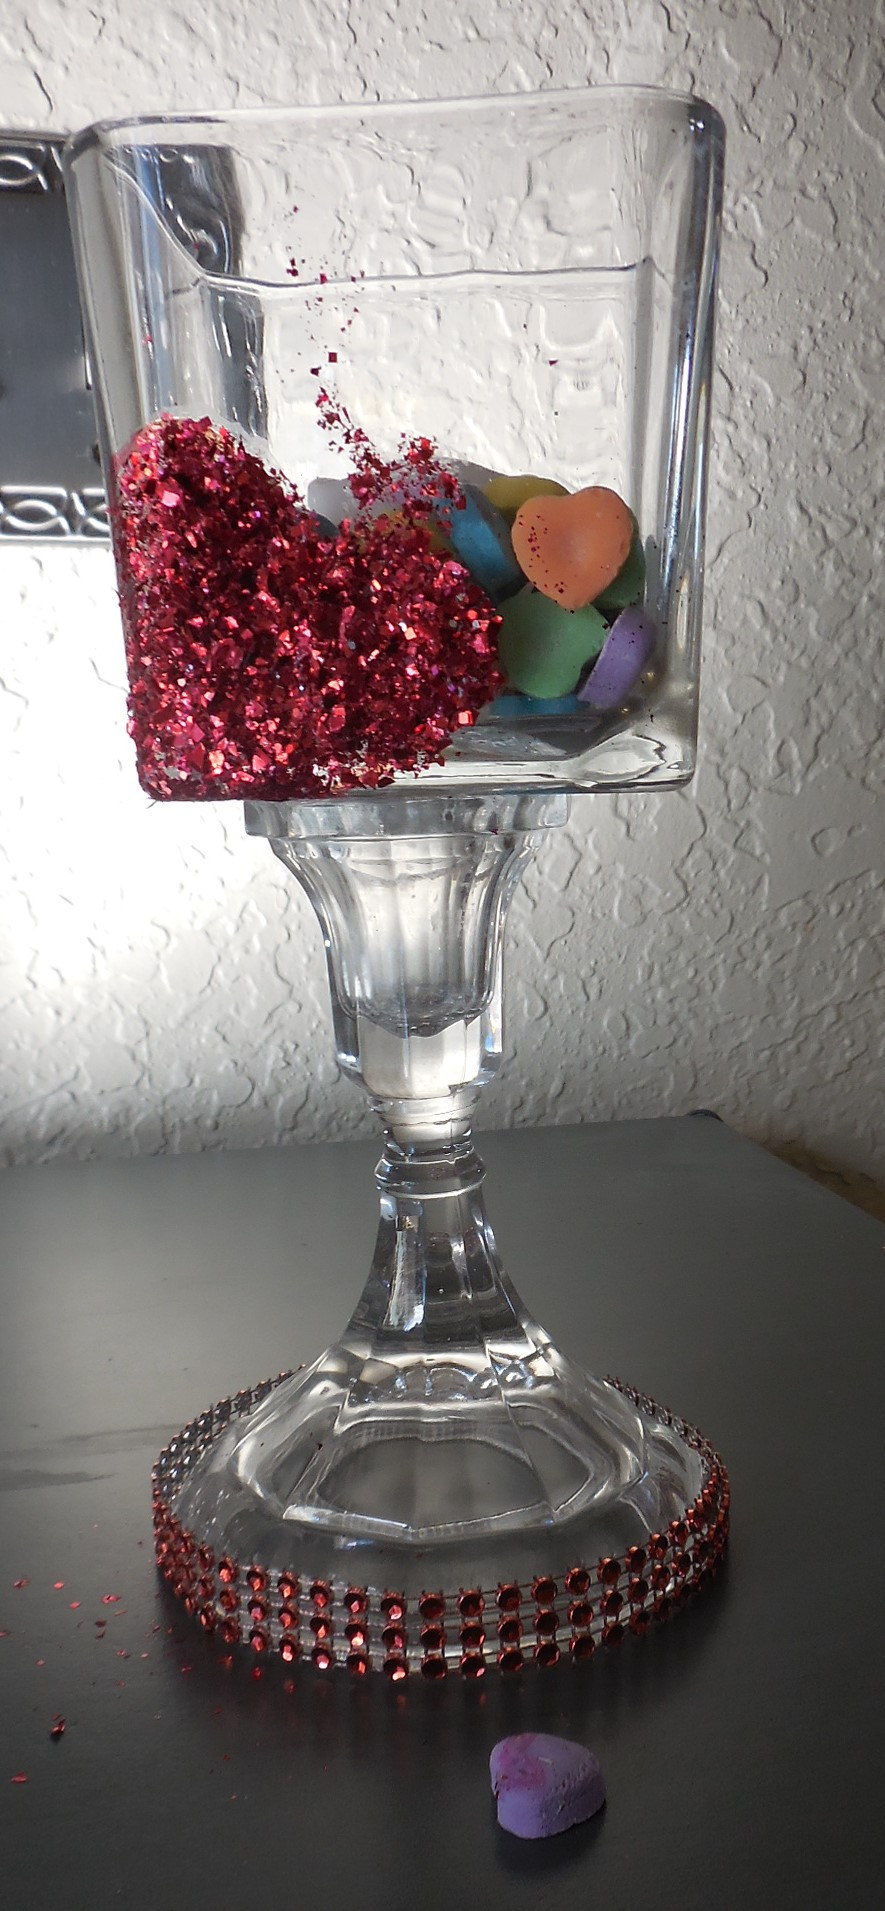 mod podge glitter vase of easy valentines day craft kelleysdiy for or you can put the mod podge on the candle and sprinkle with red glitter and add those clear glass fillers you can get at dollar store love that dollar